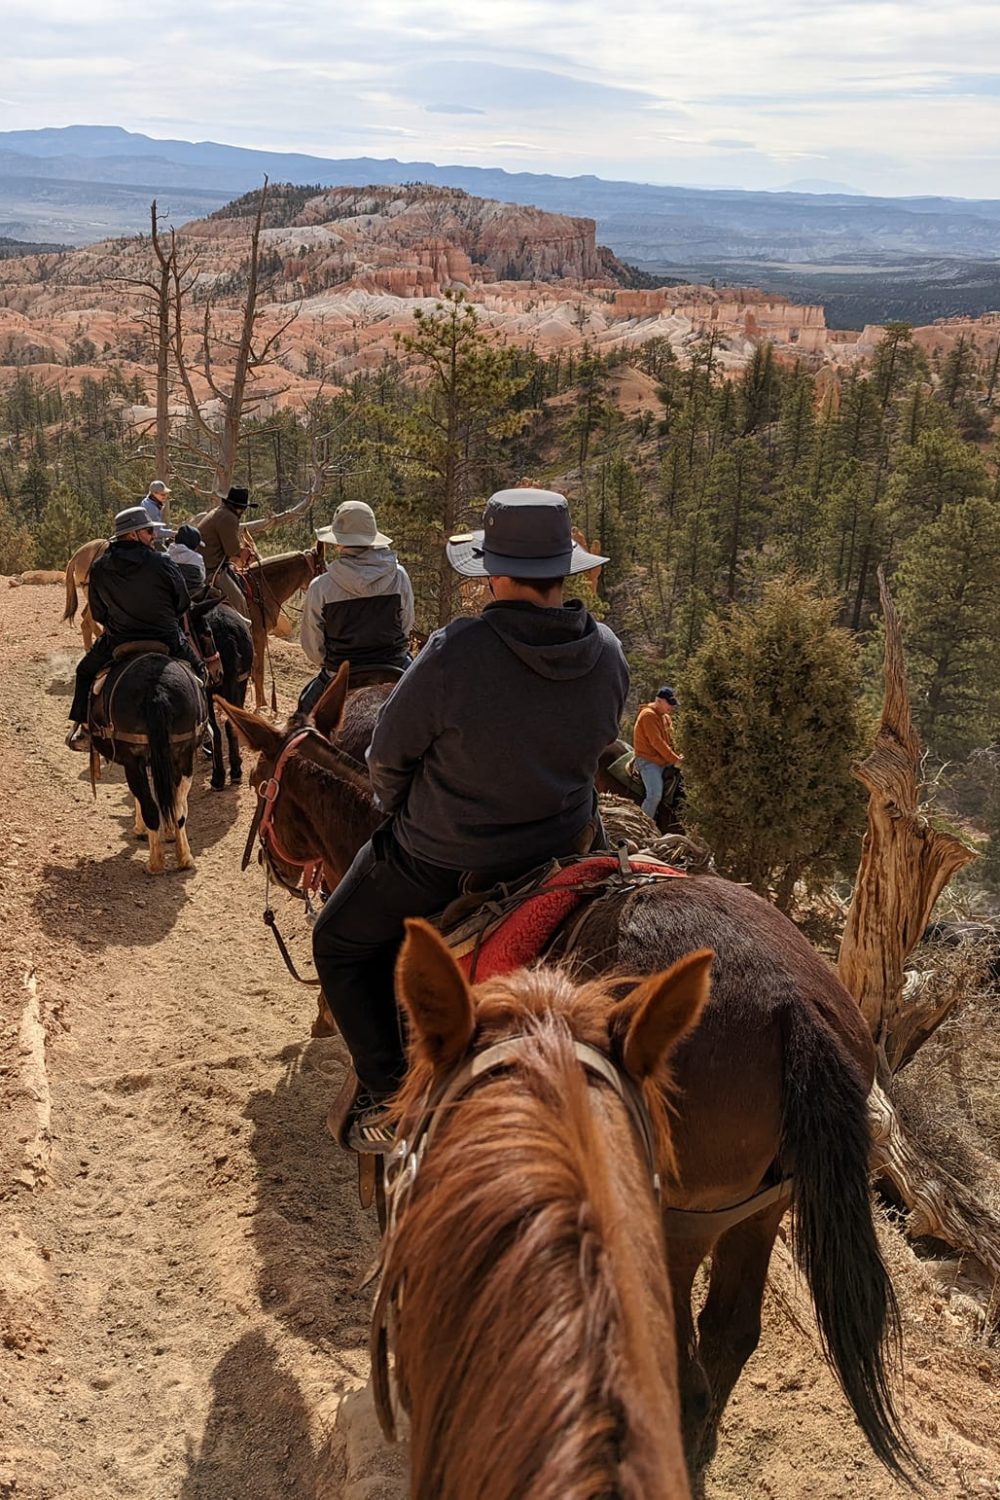 Coming donw Bryce Canyon on our horses